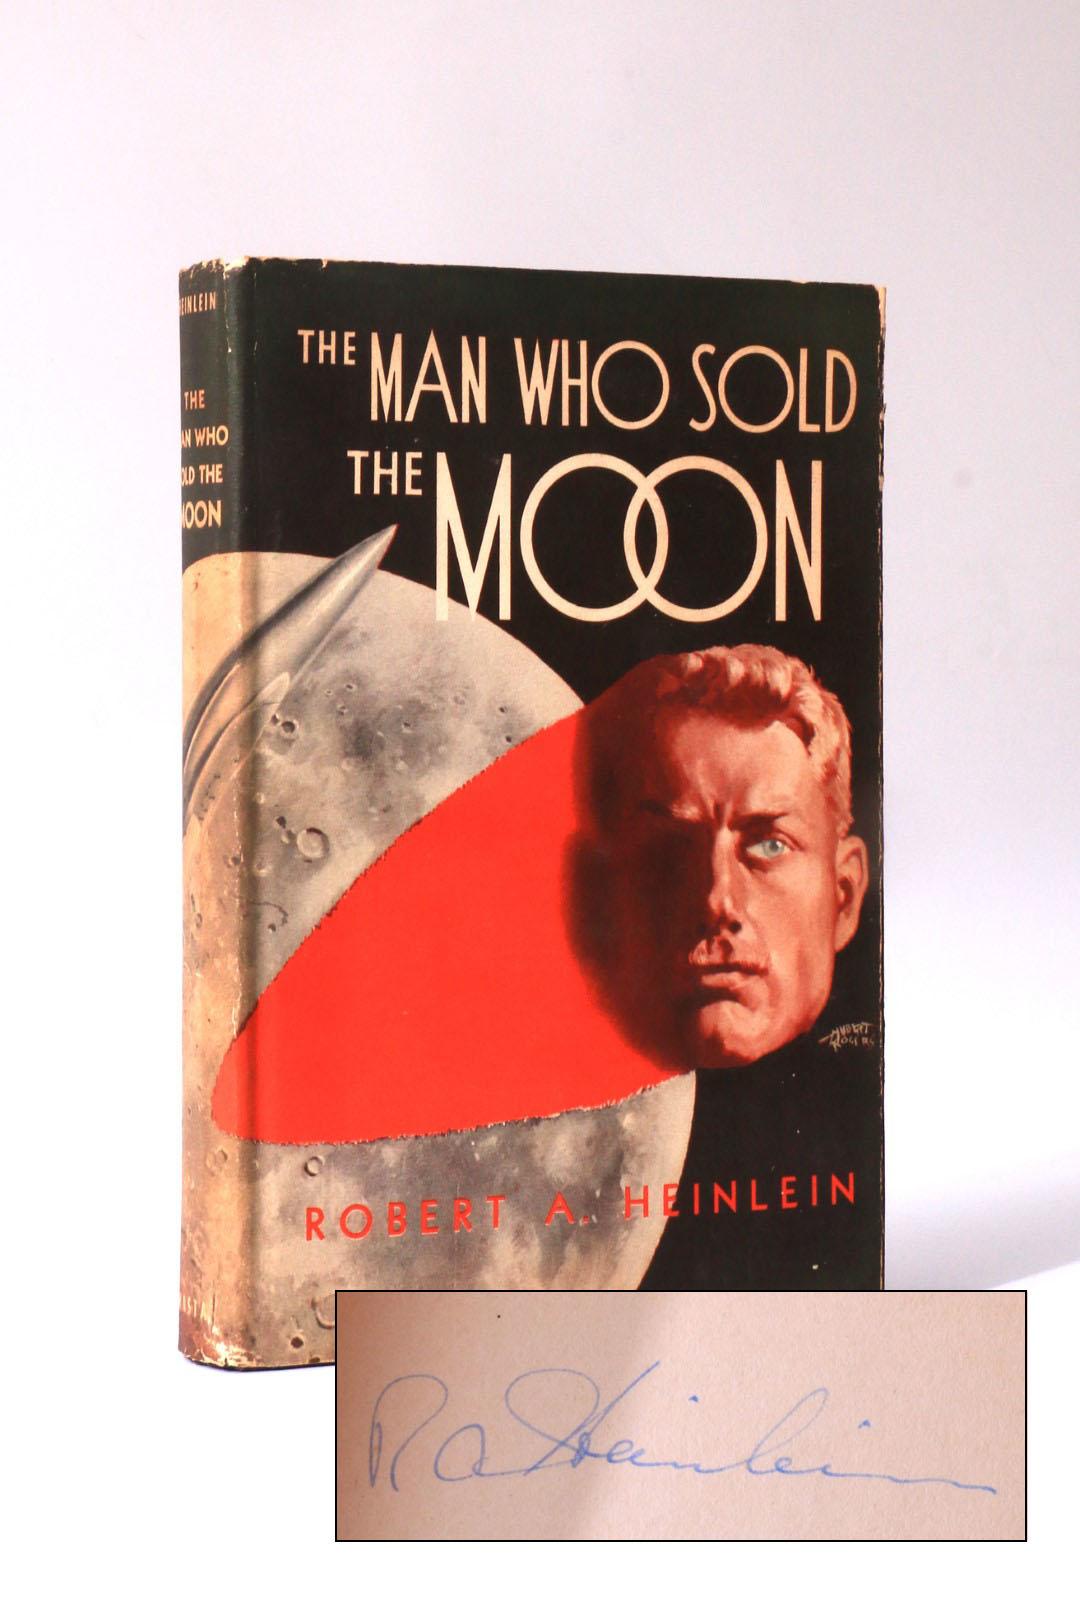 Robert A. Heinlein - The Man Who Sold the Moon - Shasta, 1950, First Edition.